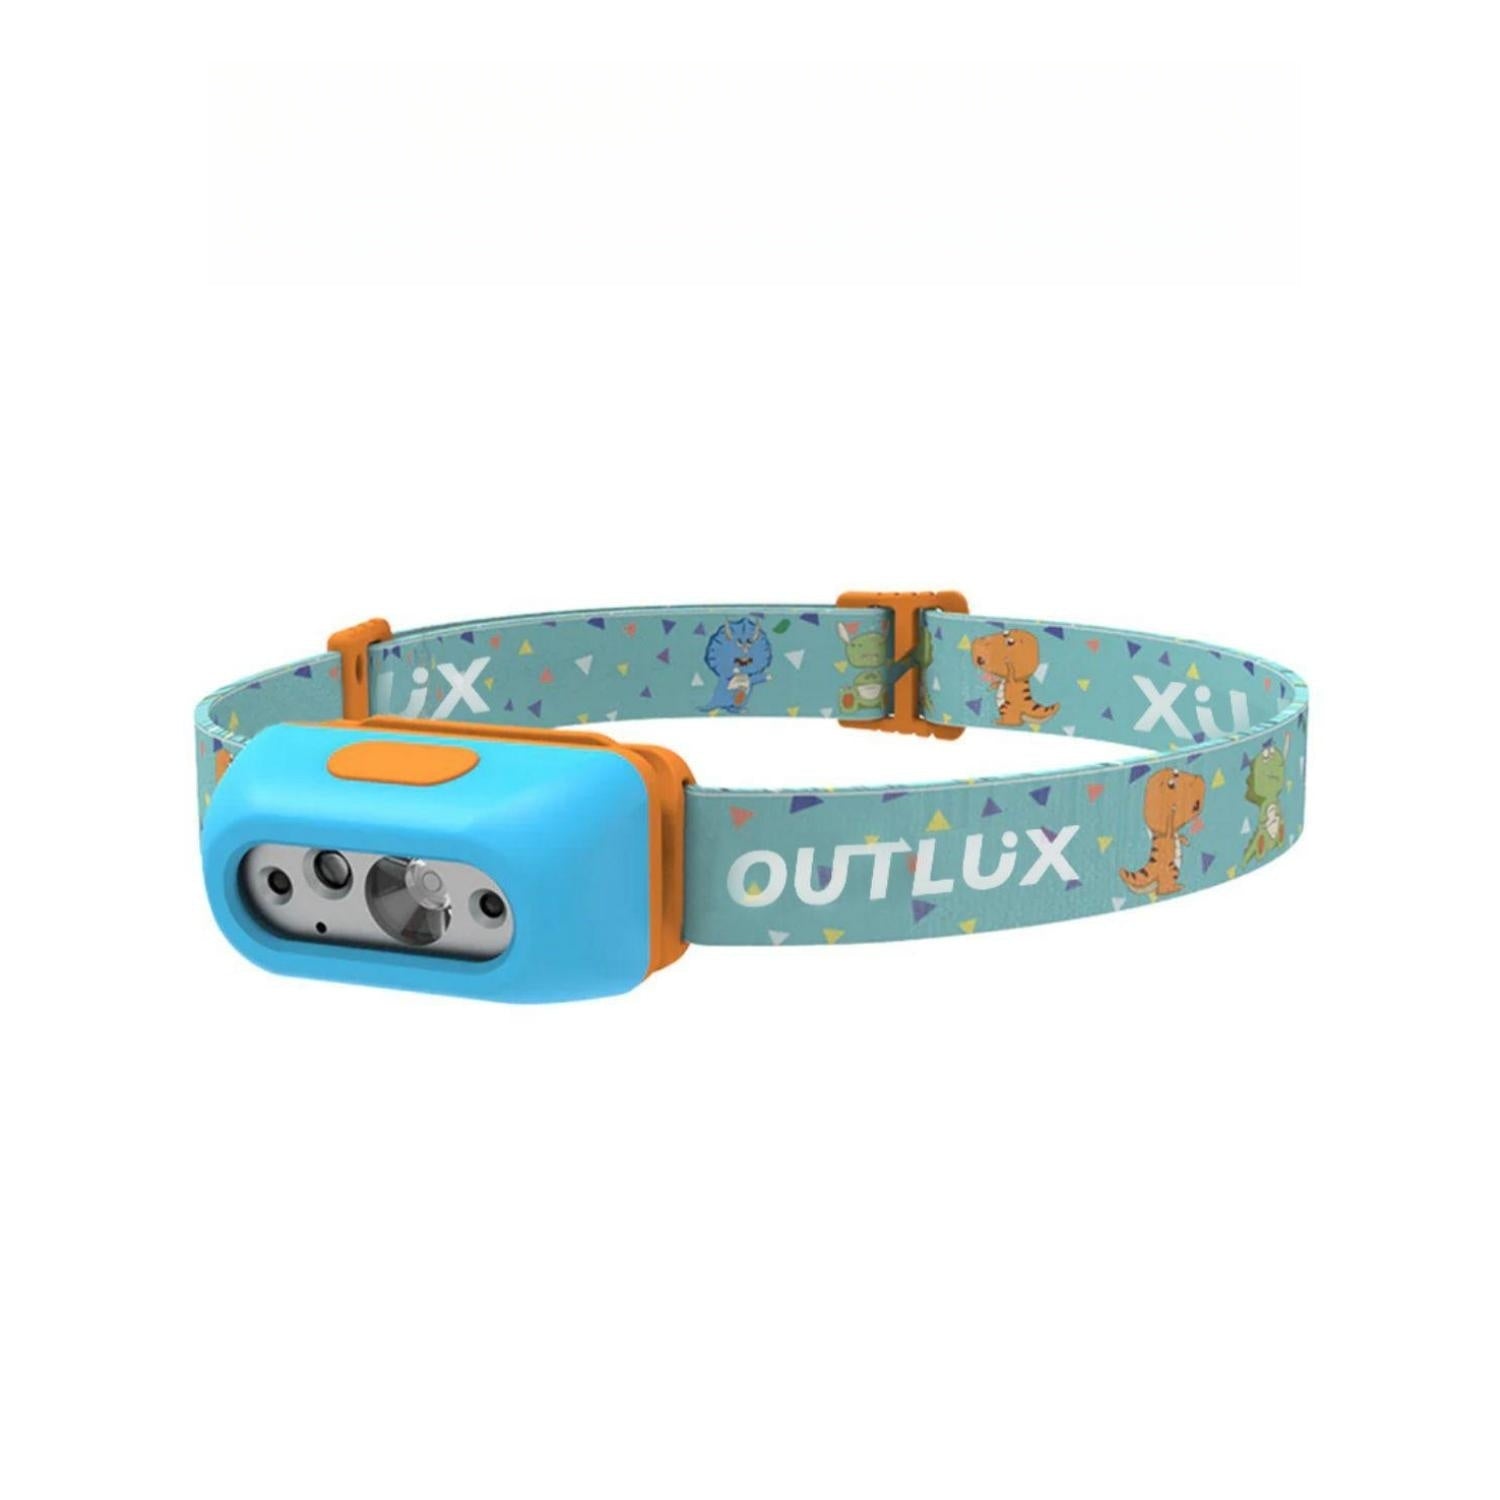 Outlux Children's Camping Headlights-W089